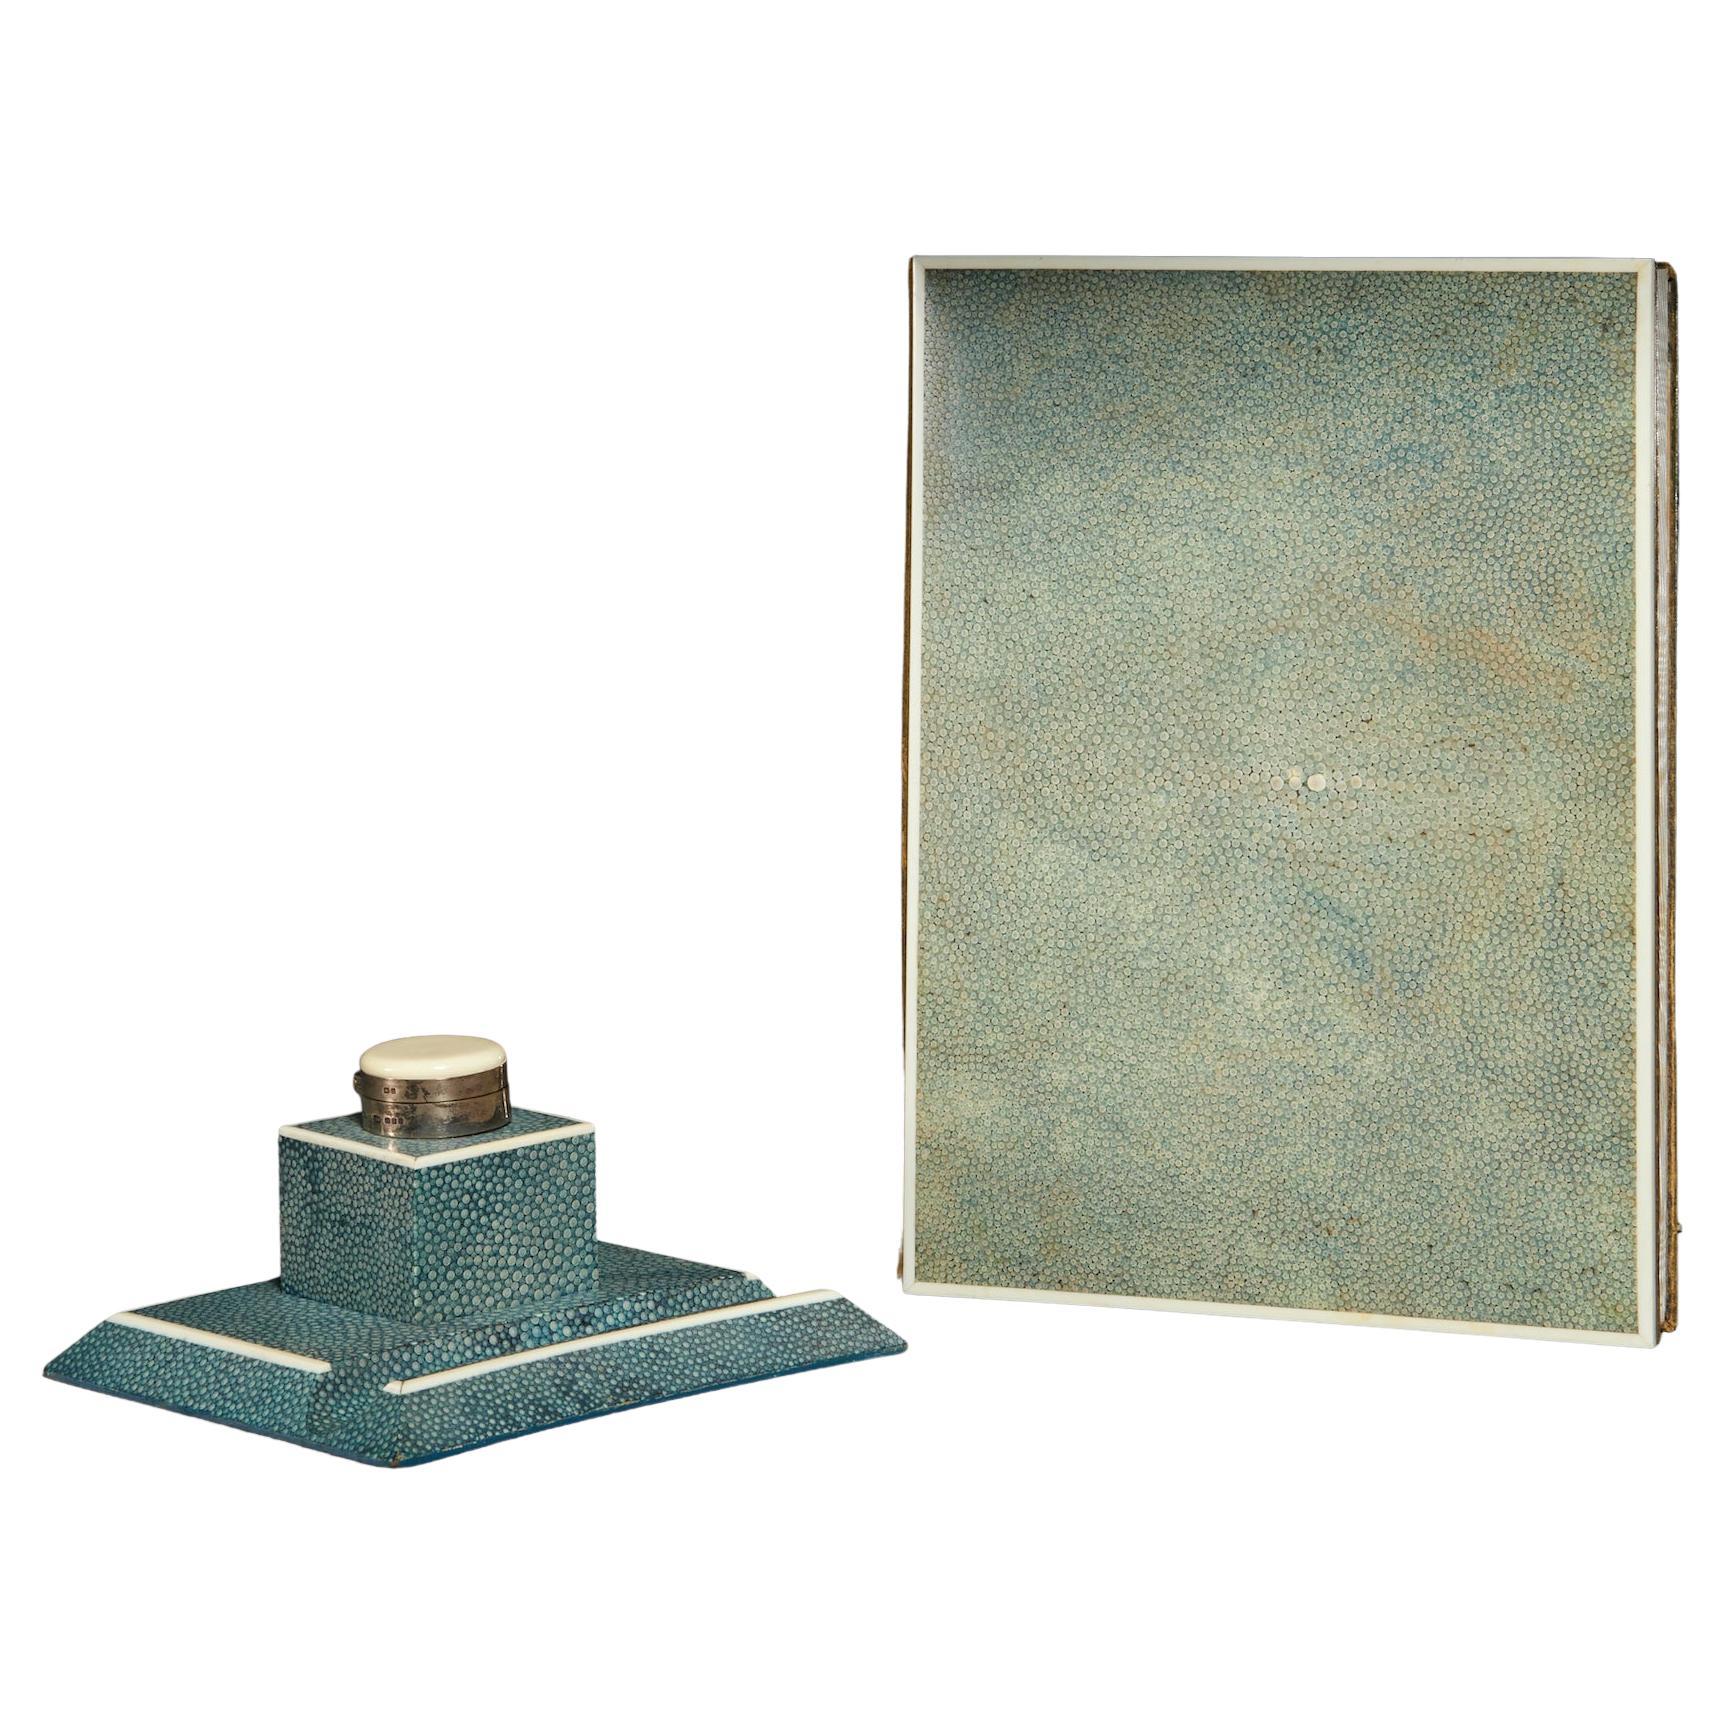 English Art Deco Period Blue Shagreen Desk Set of a Folder and Inkwell For Sale